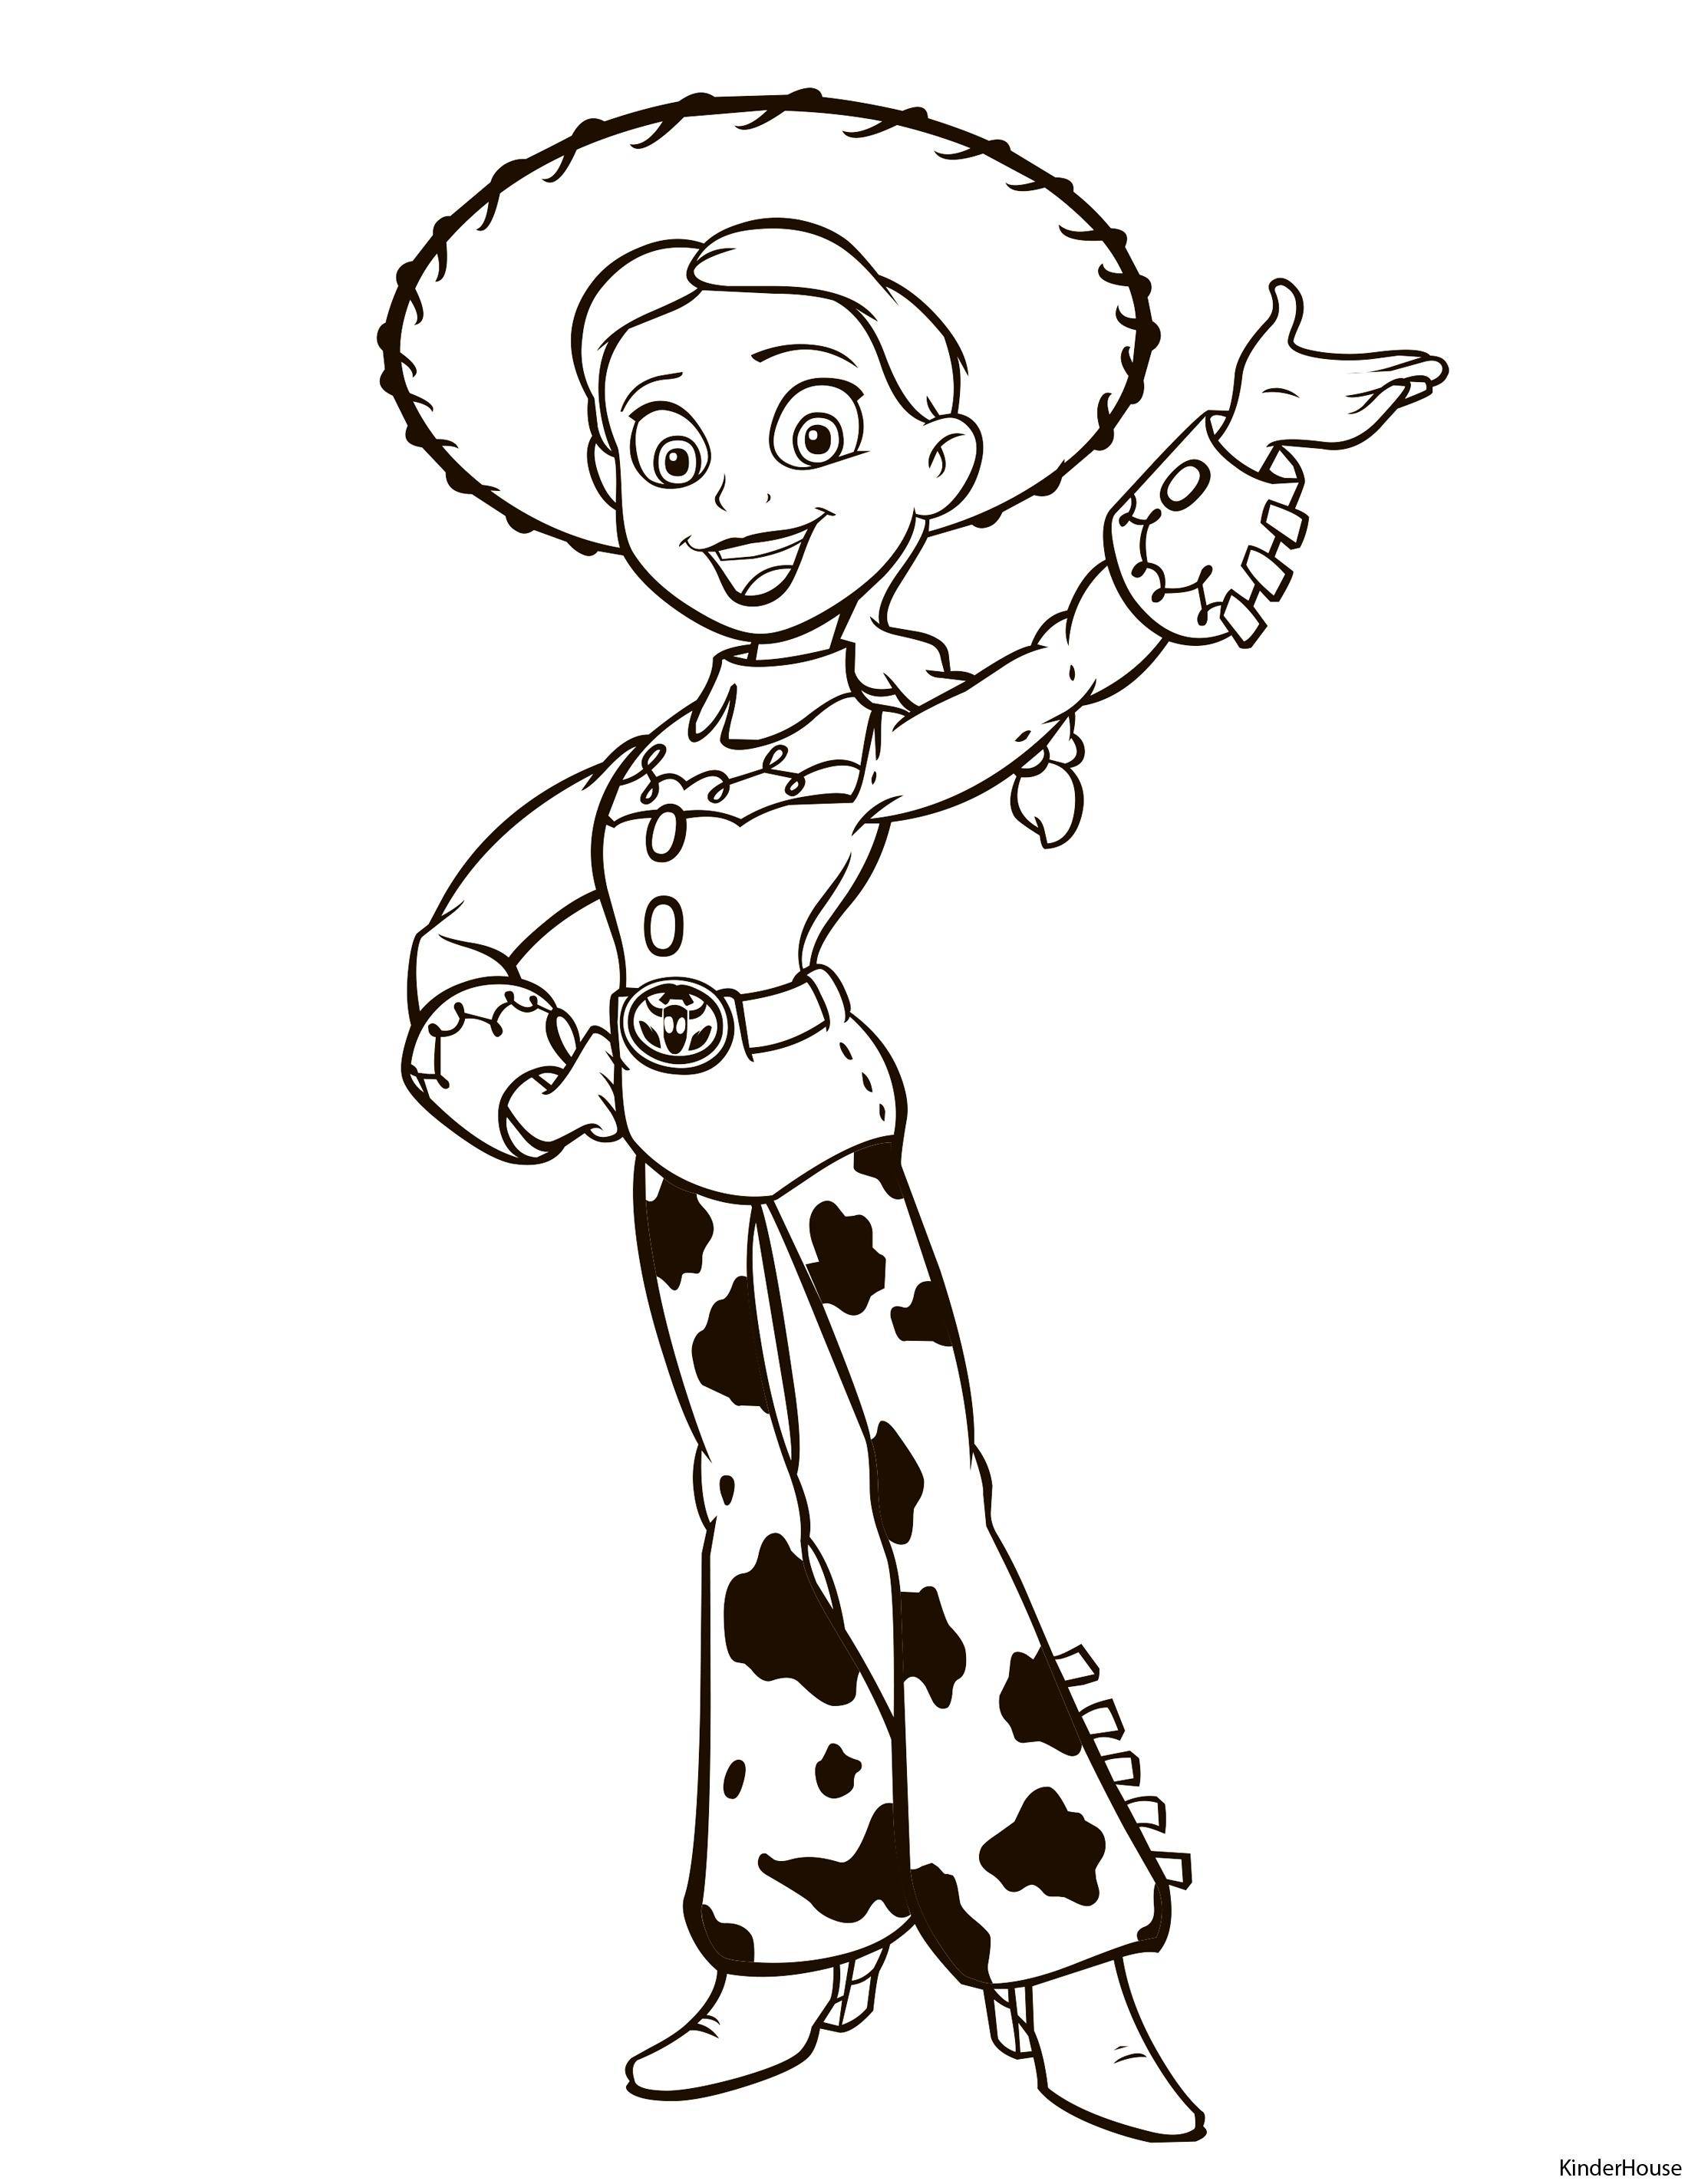 Coloring Jessie doll cowgirl. Category toy story. Tags:  Jesse , doll, cowgirl.